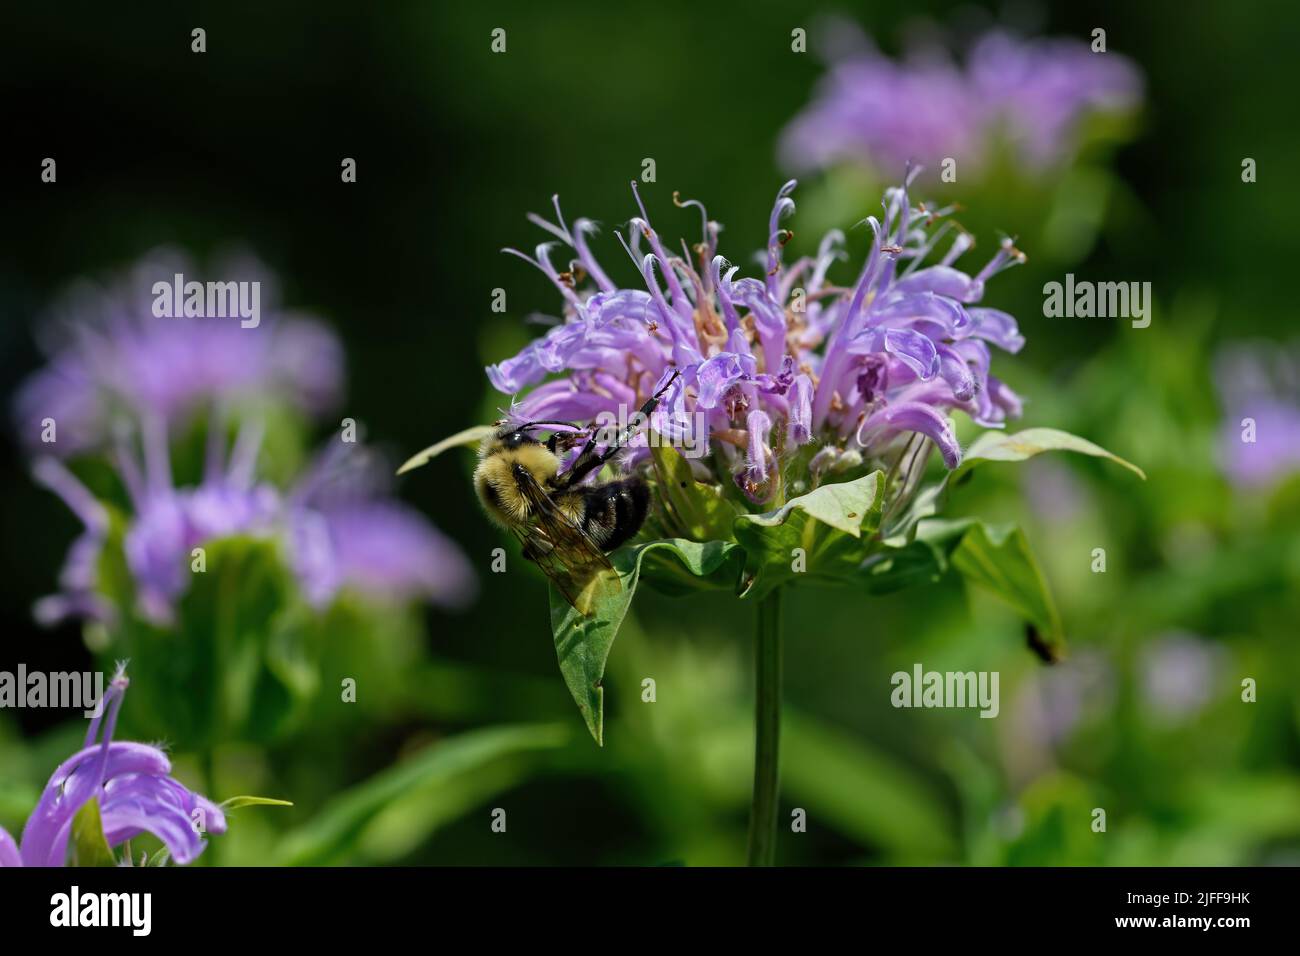 Bumblebee which is a member of the genus Bombus part of Apidae on Bee balm growing in a backyard garden. Stock Photo